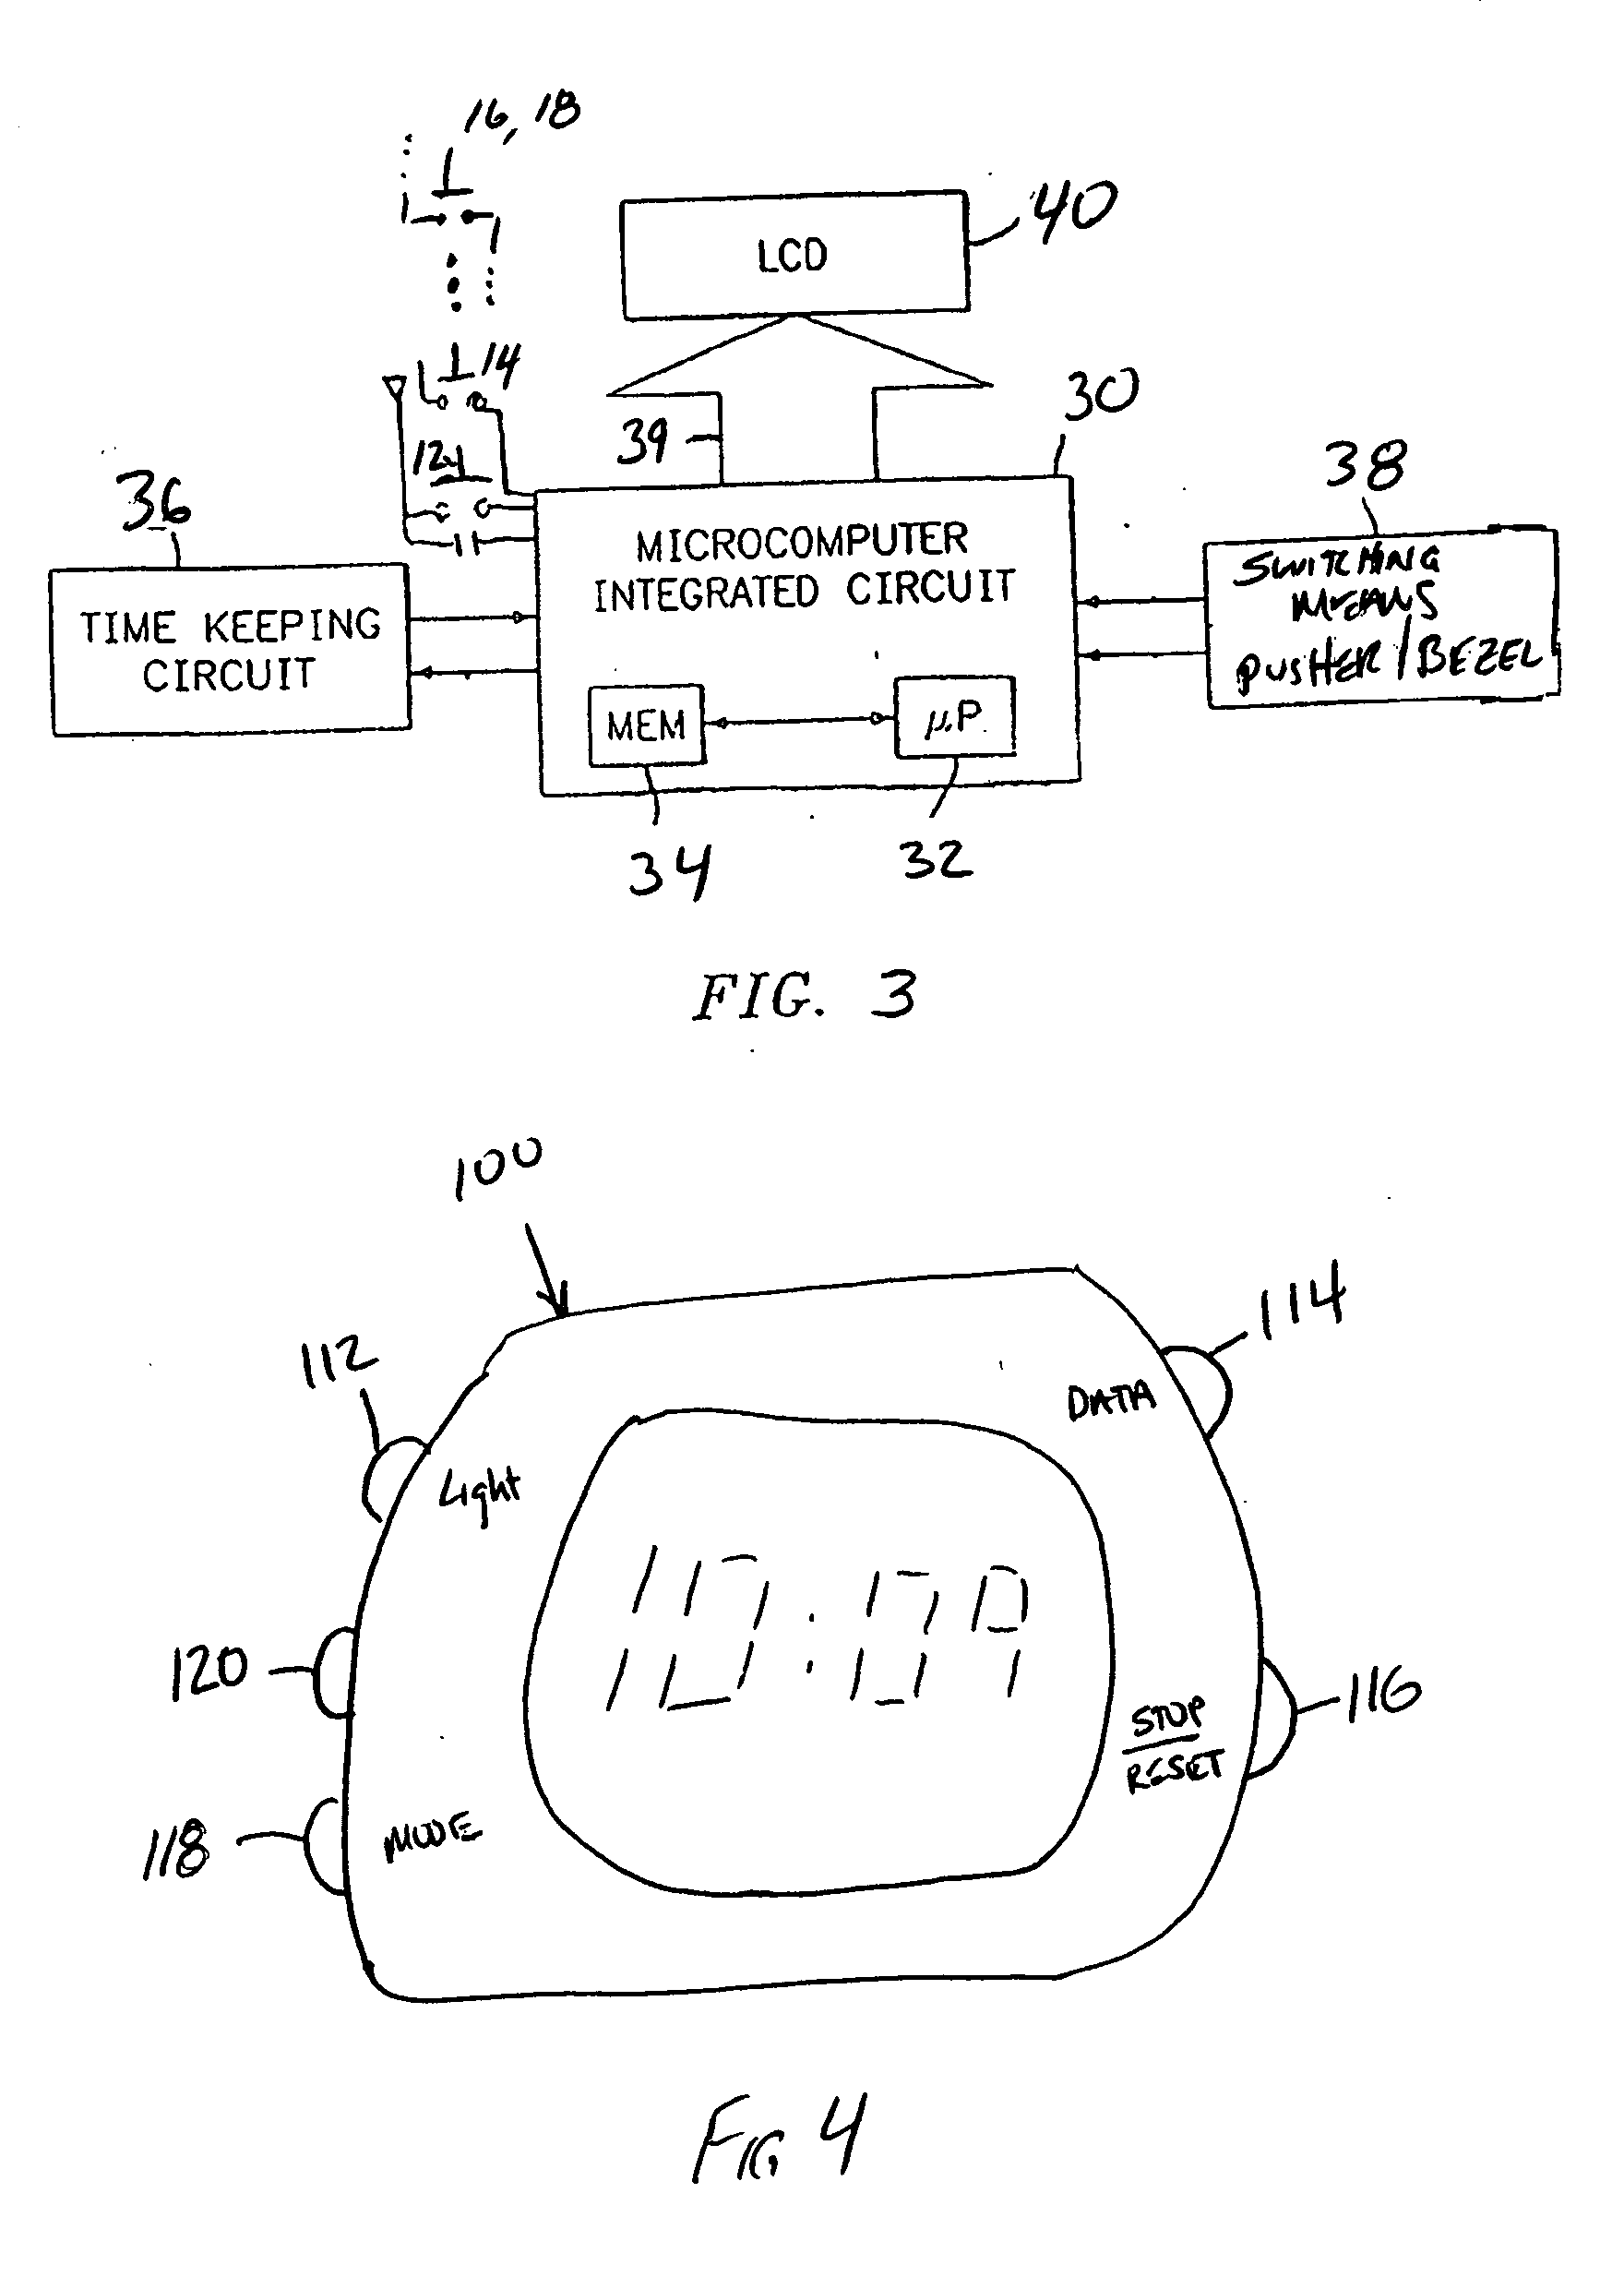 System and method for modifying button functionality